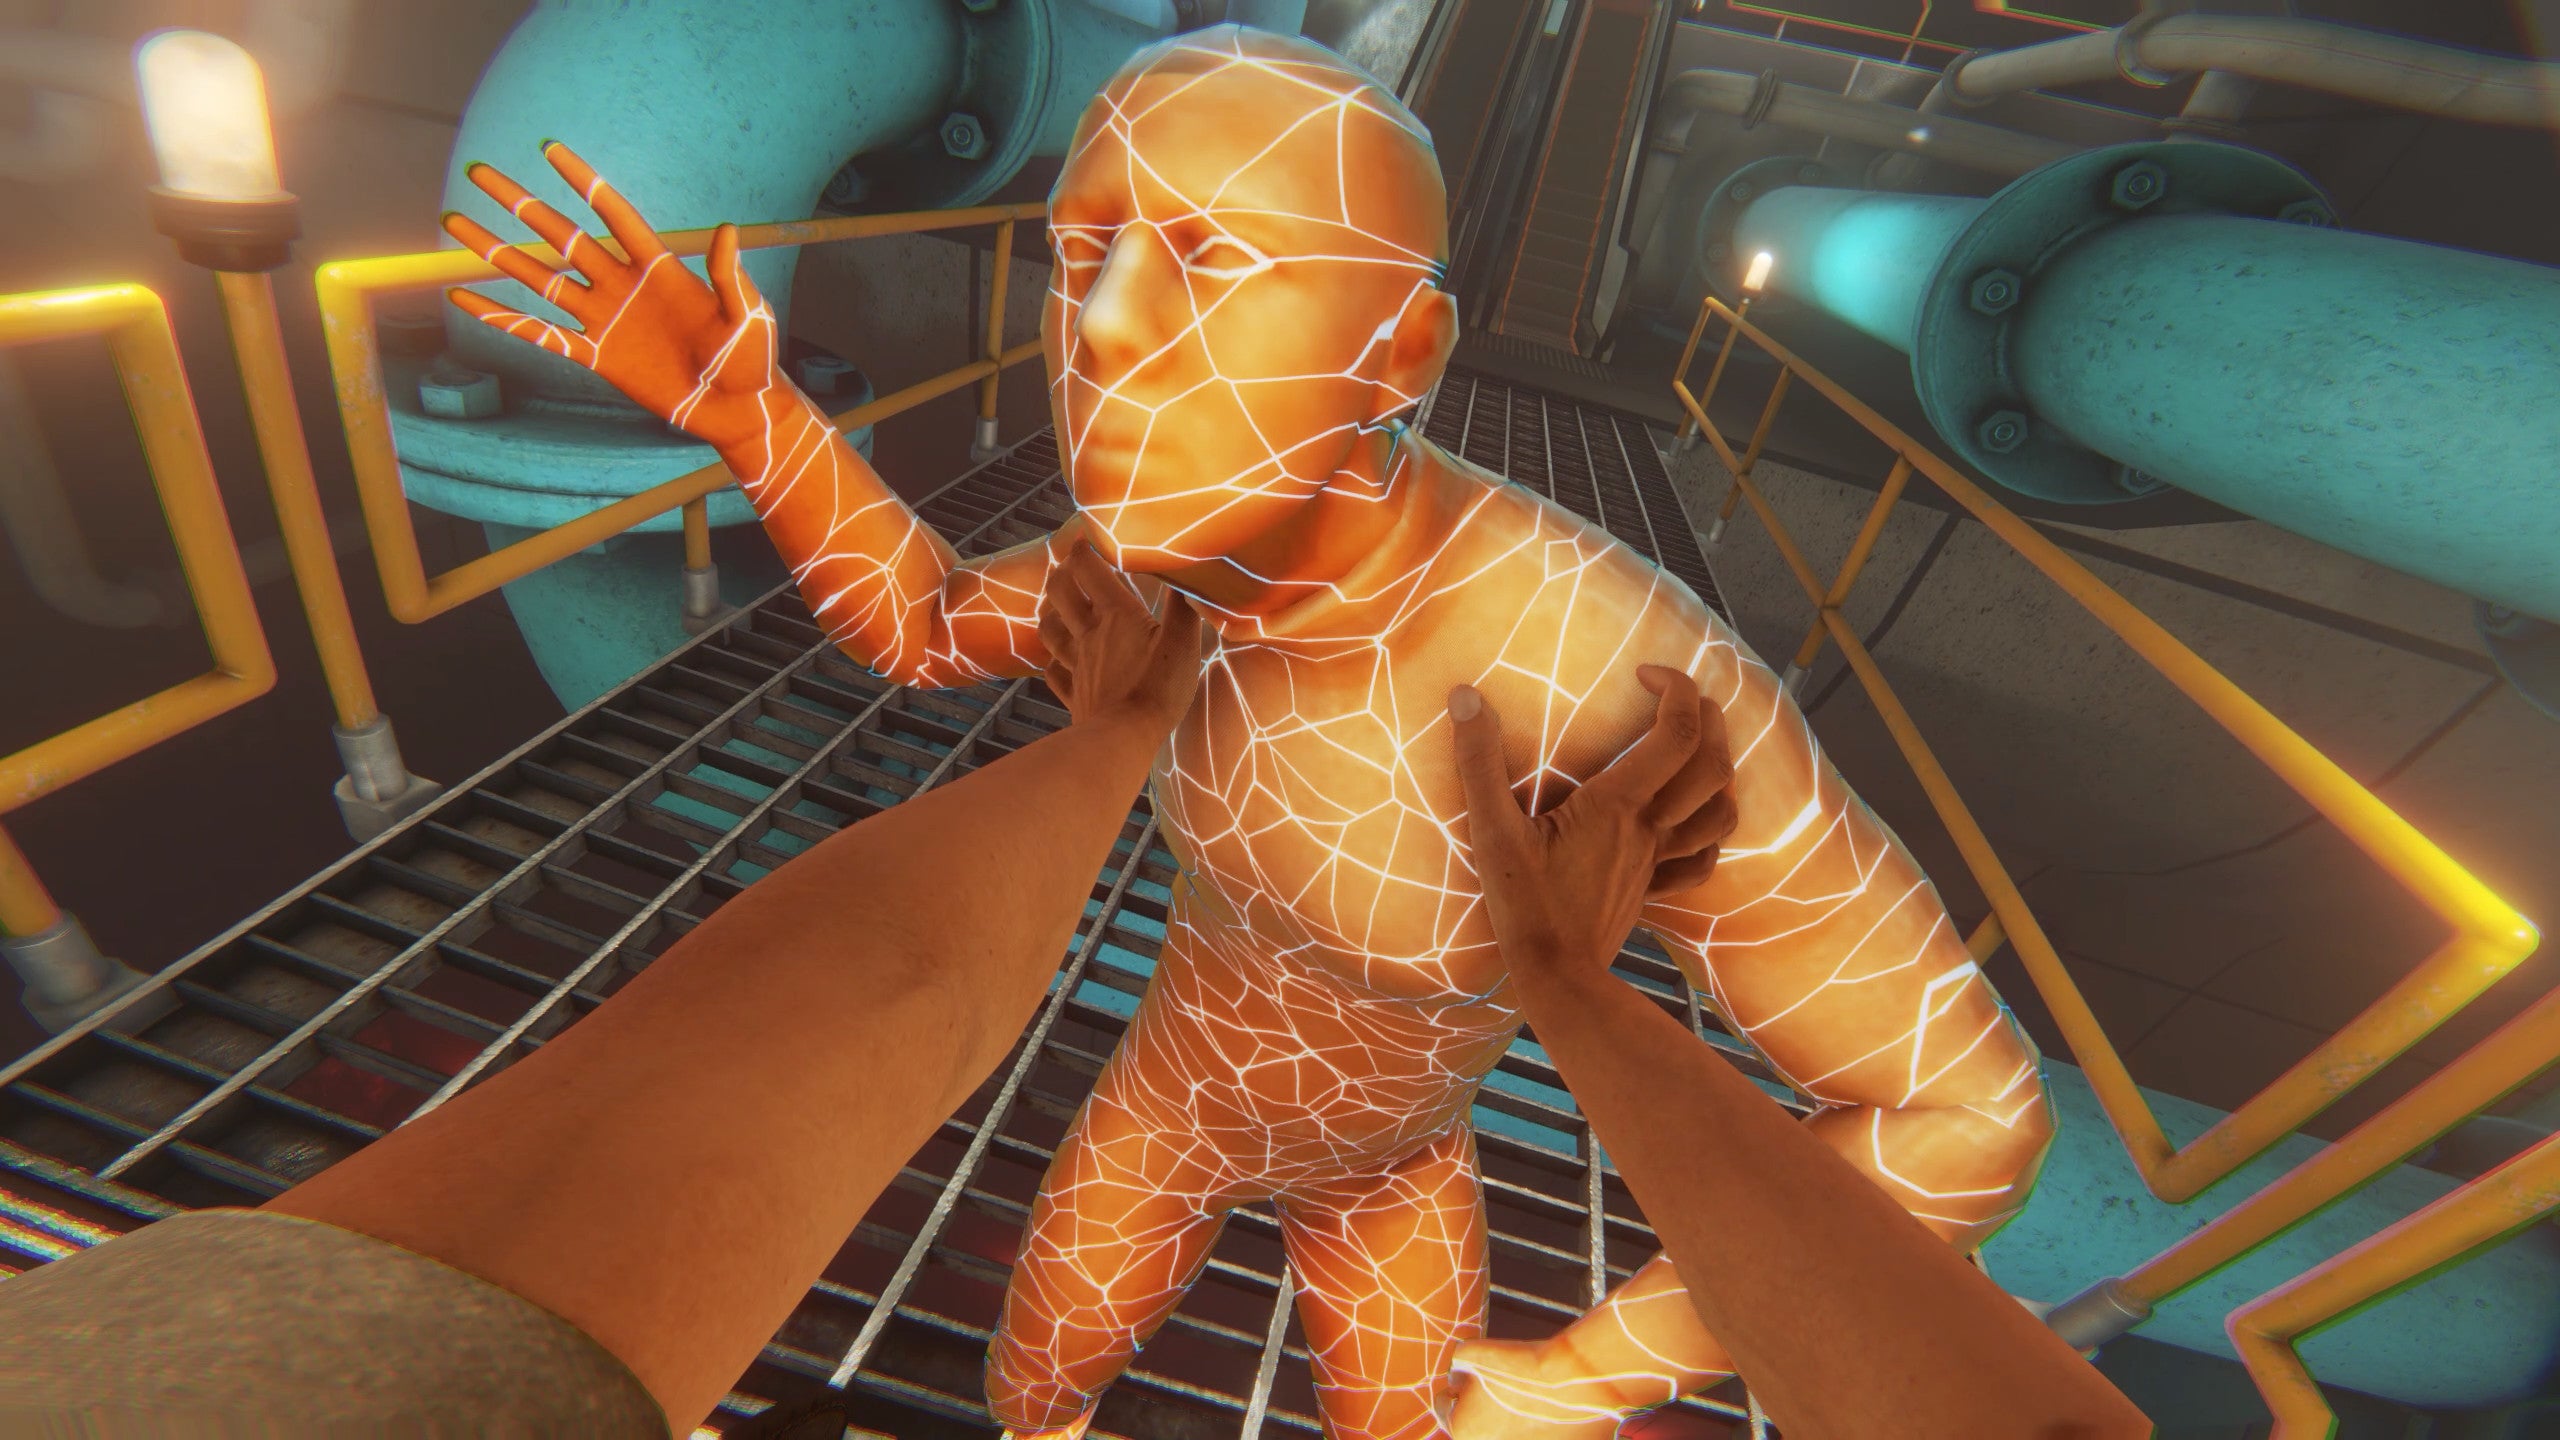 A strange orange figure covered in a web of white light lunges at the player in Bonelab